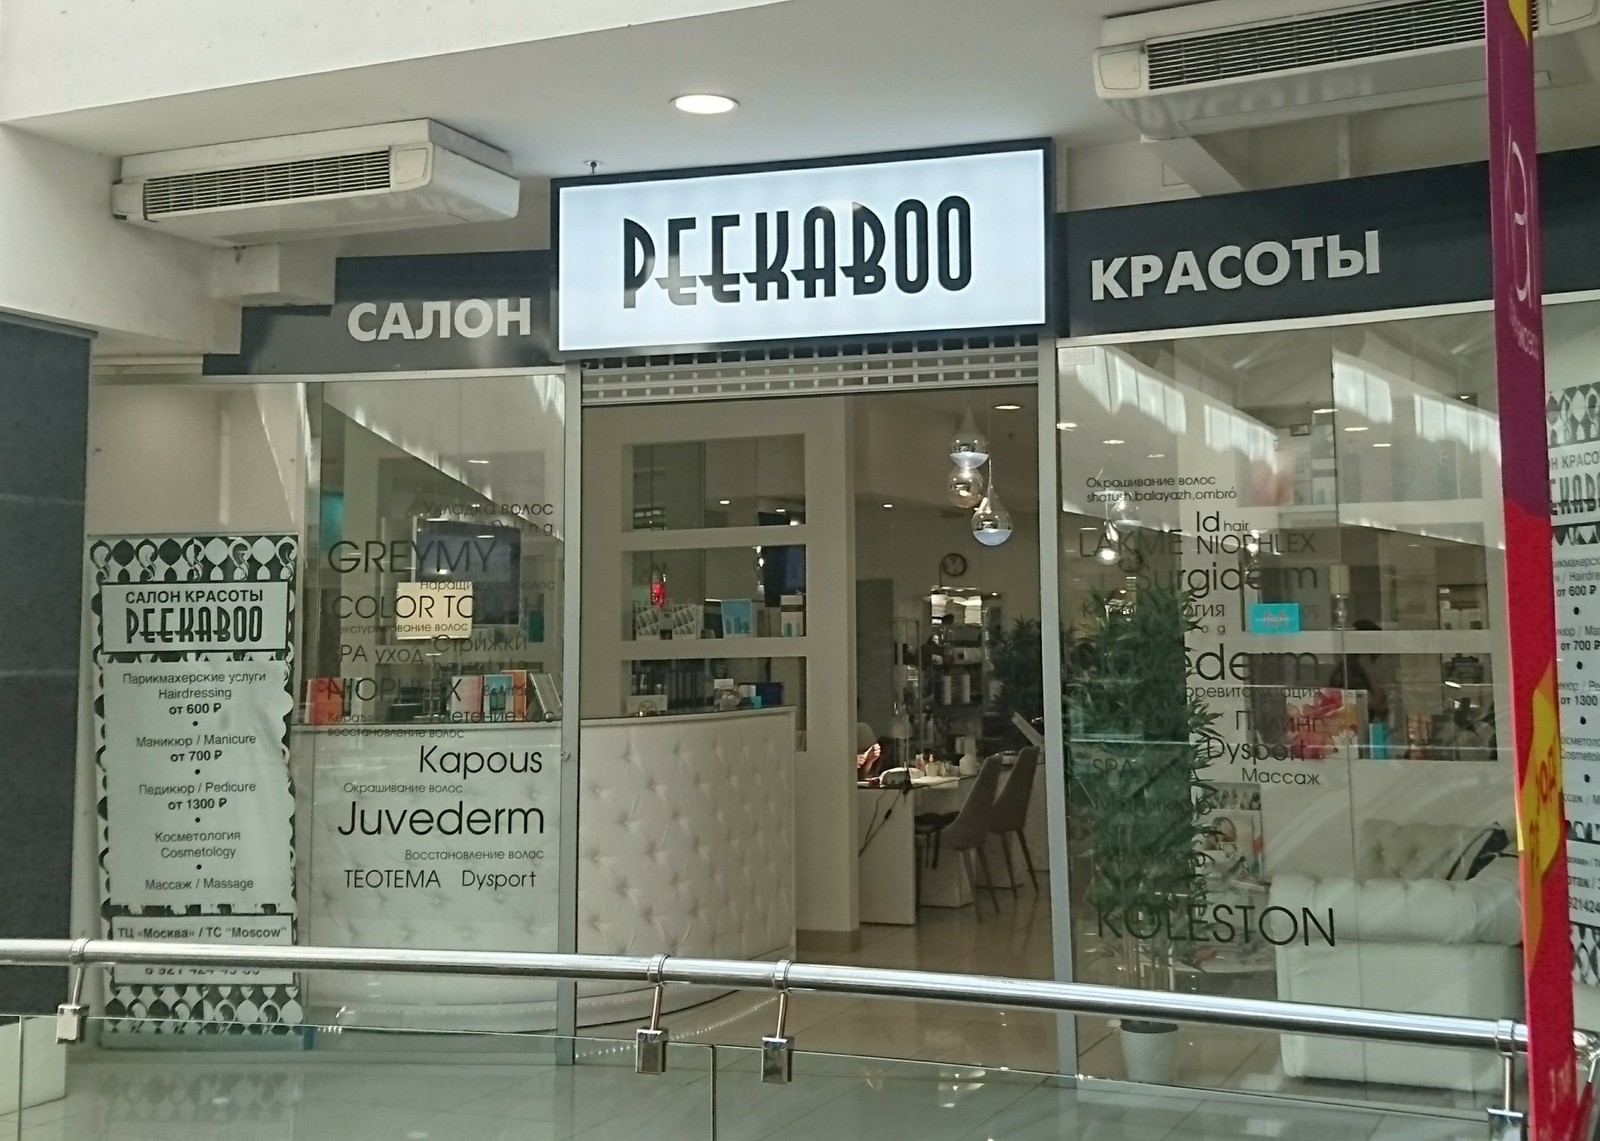 A beauty salon with an interesting name was discovered in St. Petersburg - My, Peekaboo, Beauty saloon, Saint Petersburg